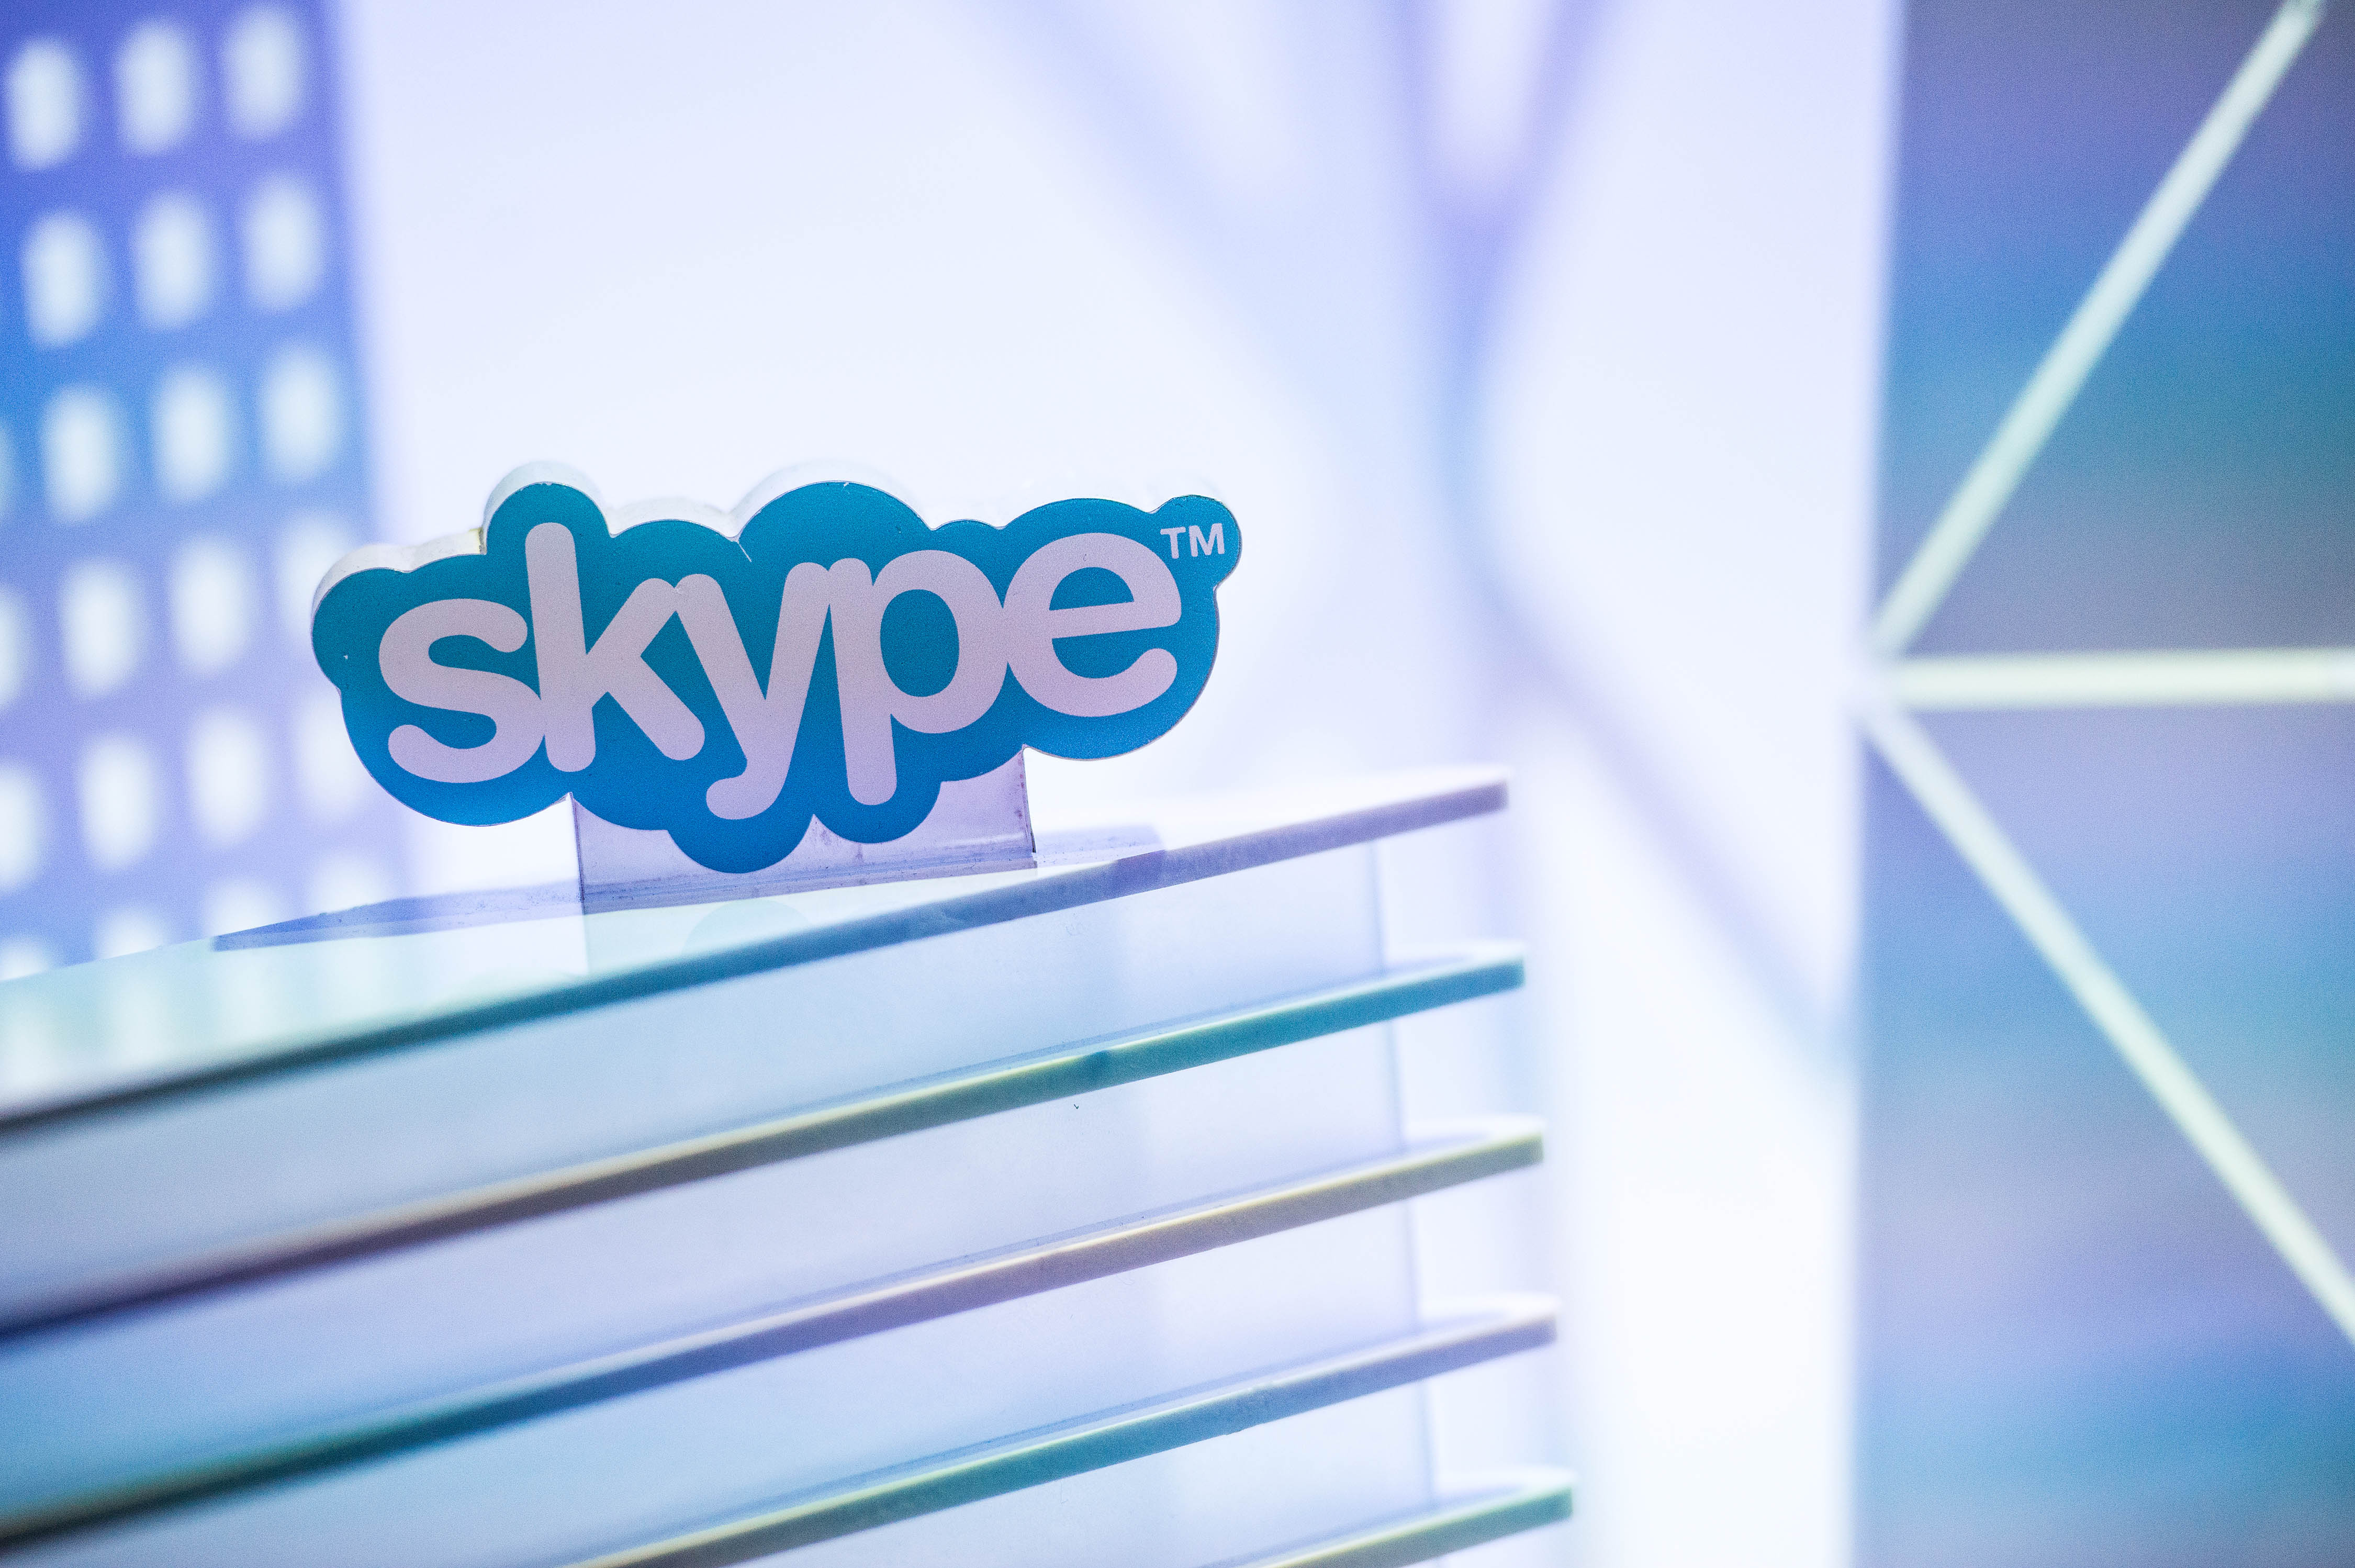 A Skype logo is seen at the Microsoft pavilion during the second day of the Mobile World Congress 2015 at the Fira Gran Via complex on March 3, 2015 in Barcelona, Spain. The annual Mobile World Congress hosts some of the wold's largest communication companies, with many unveiling their latest phones and wearables gadgets.  (Photo by David Ramos/Getty Images) (David Ramos&mdash;Getty Images)